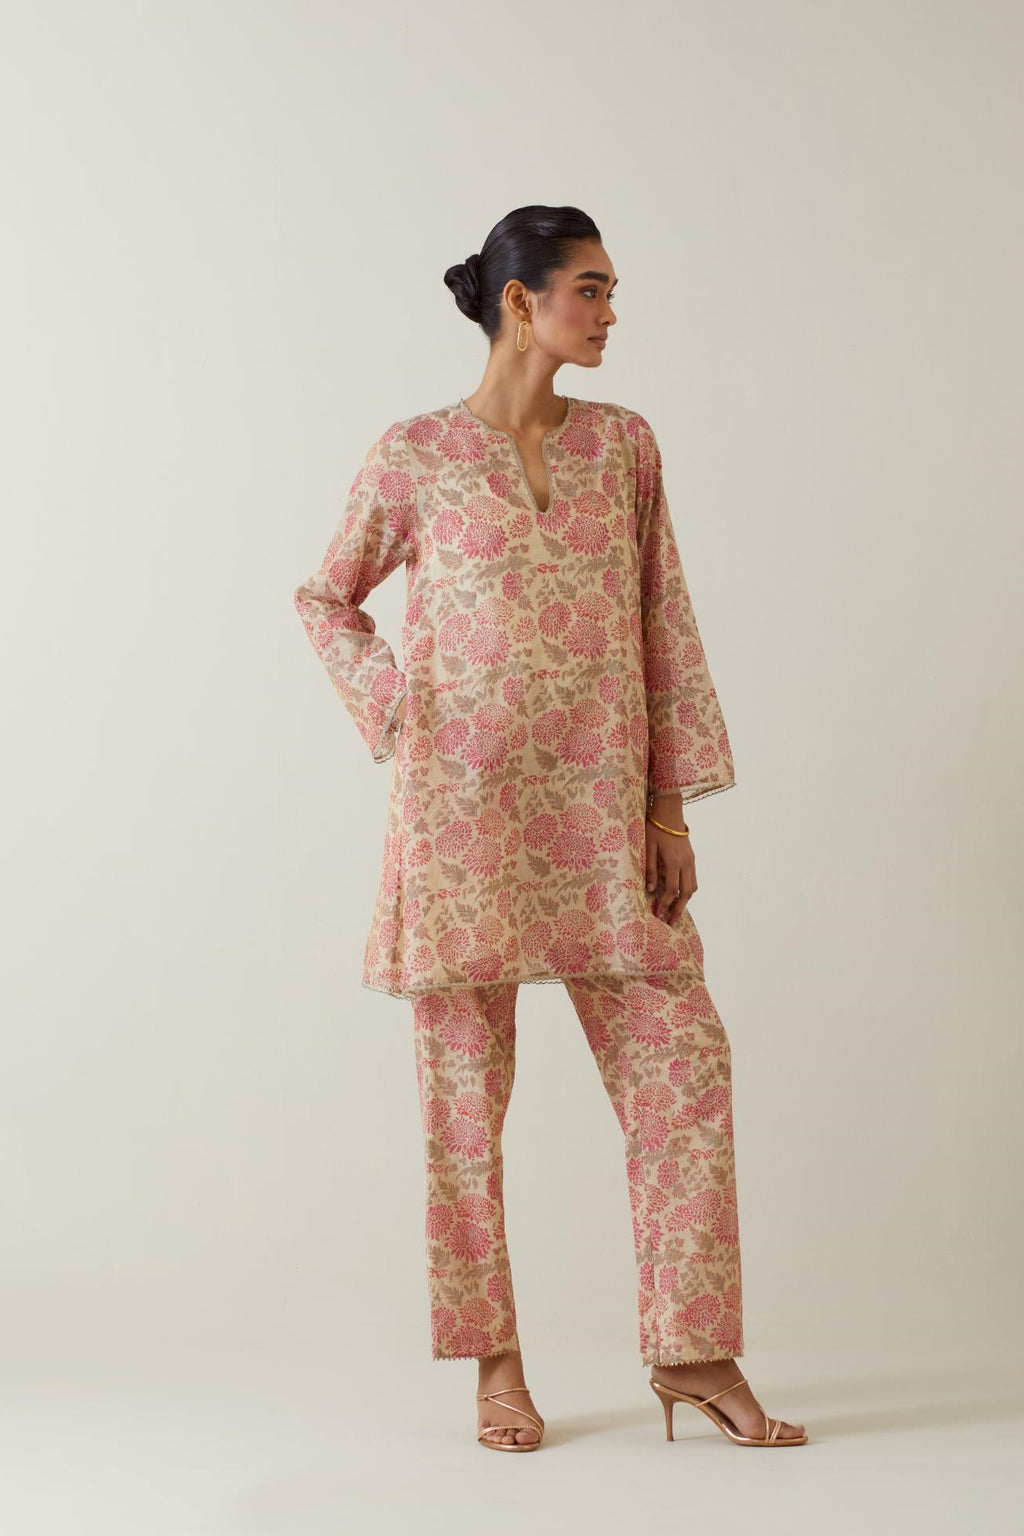 Beige tissue chanderi hand block printed easy fit short kurta, highlighted with scalloped organza at edges, paired with beige tissue chanderi all-over floral hand block printed straight pants.